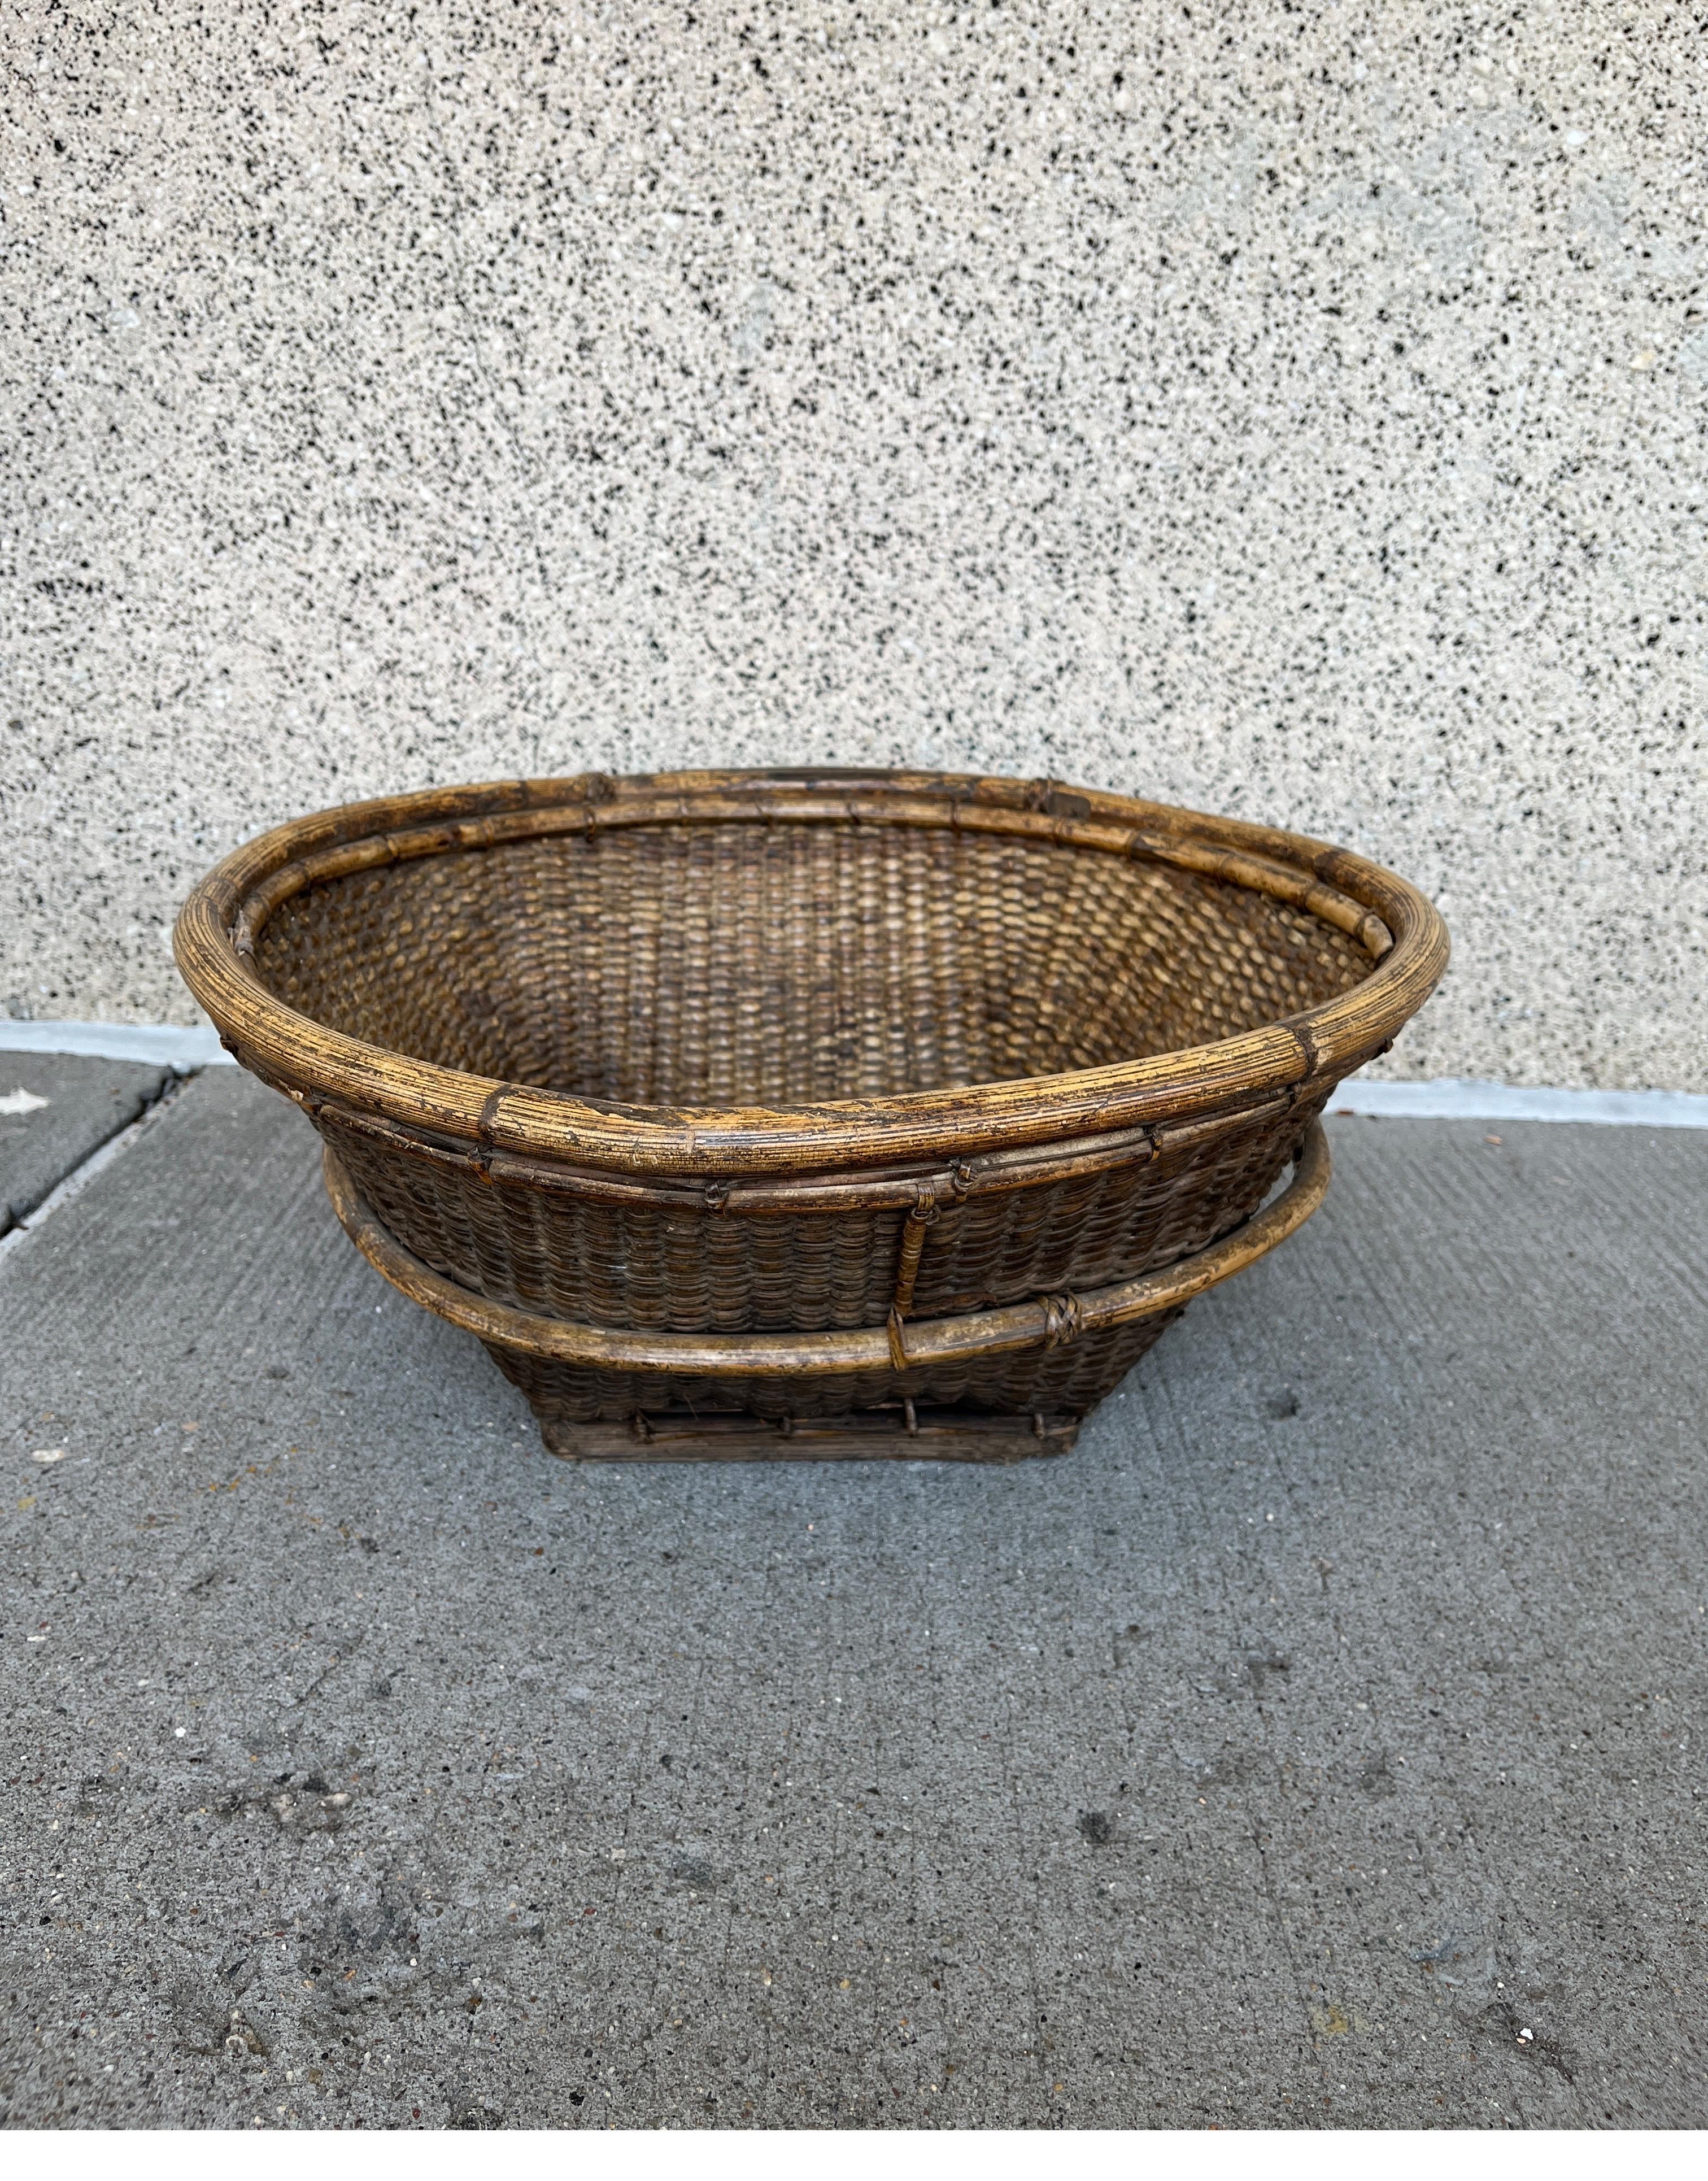 A distinctly shaped and tightly woven natural fiber and wood basket. A perfect centerpiece, this hand made and expertly assembled basket can be used in a wide variety of settings. The basket's somewhat irregular shape and combination of home grown